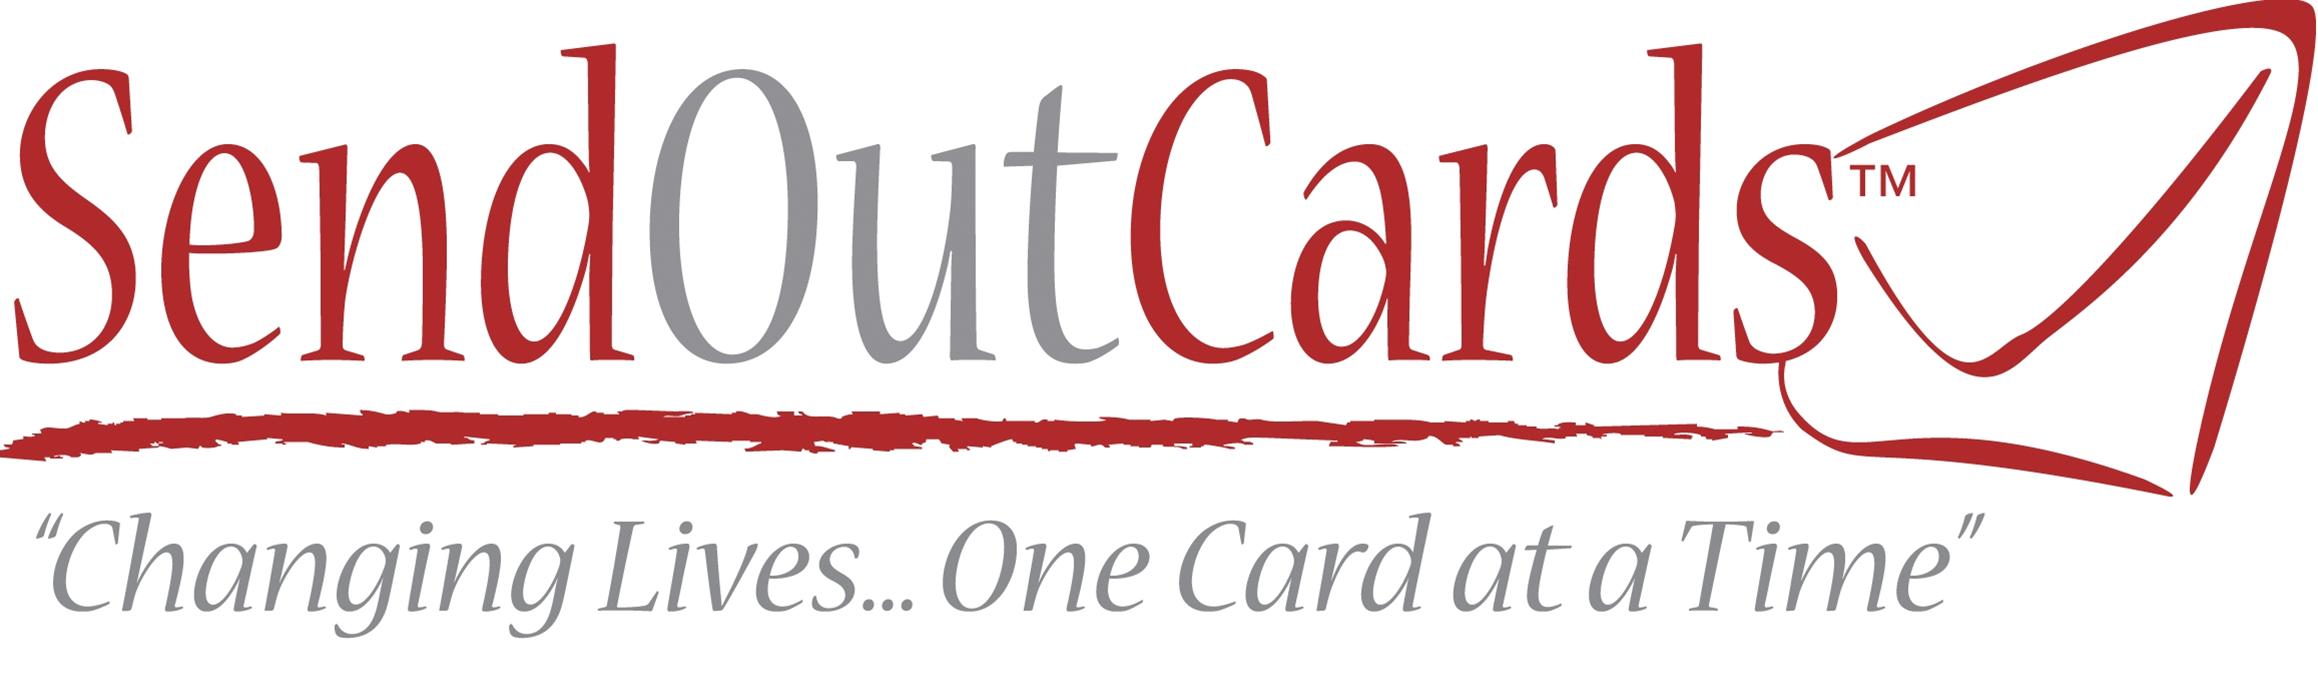 send-out-cards